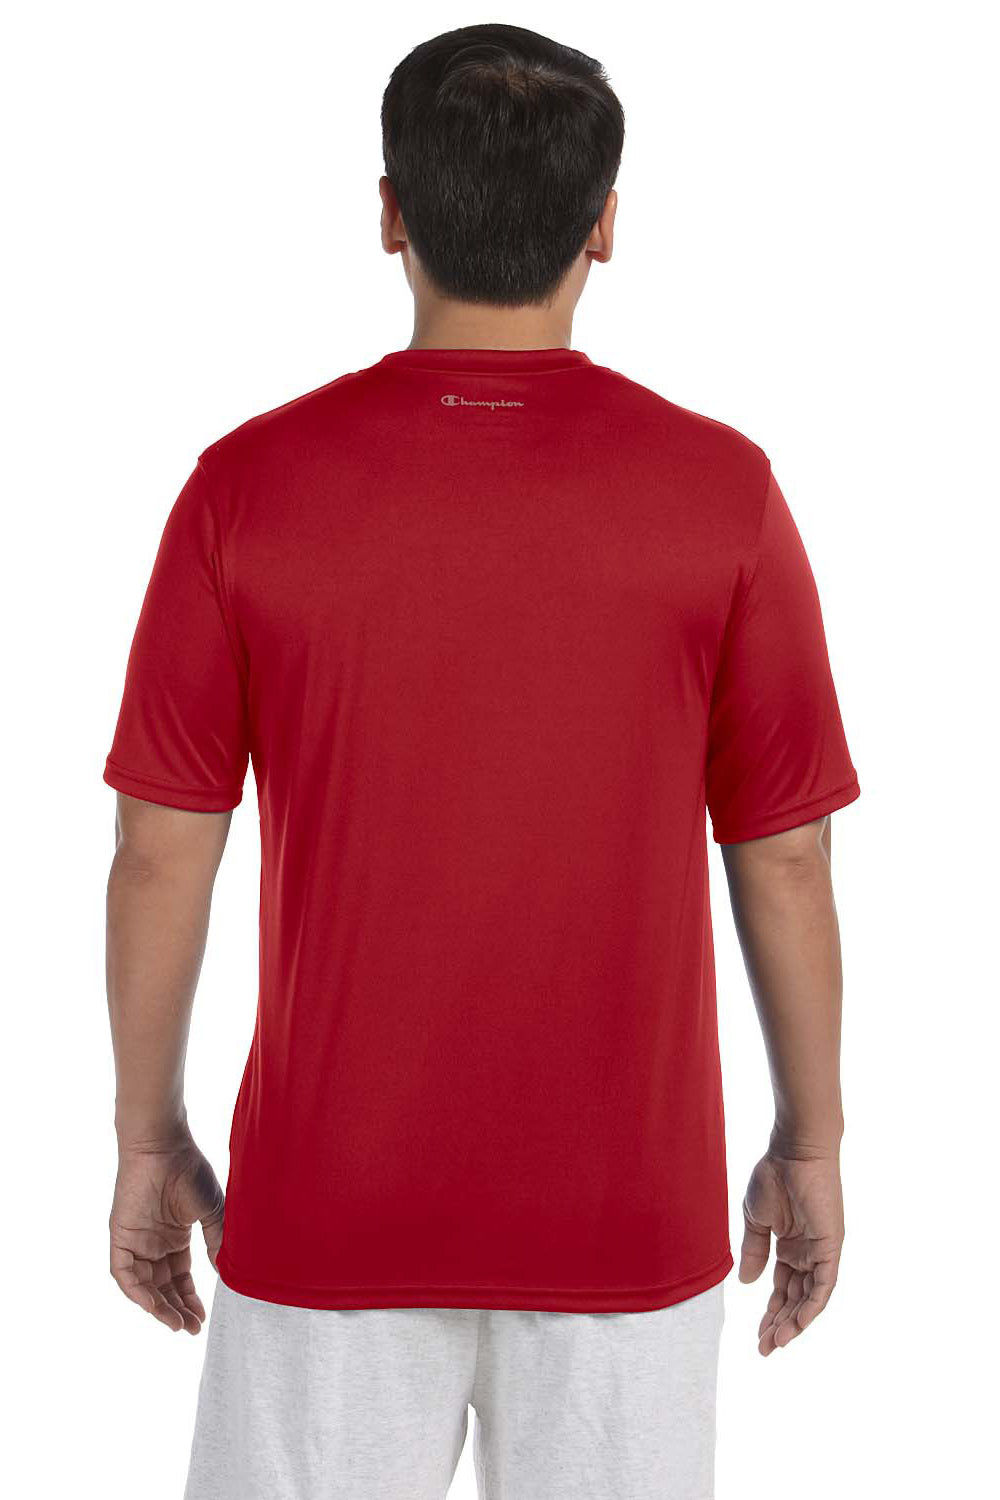 Champion CW22 Mens Double Dry Moisture Wicking Short Sleeve Crewneck T-Shirt Red Back